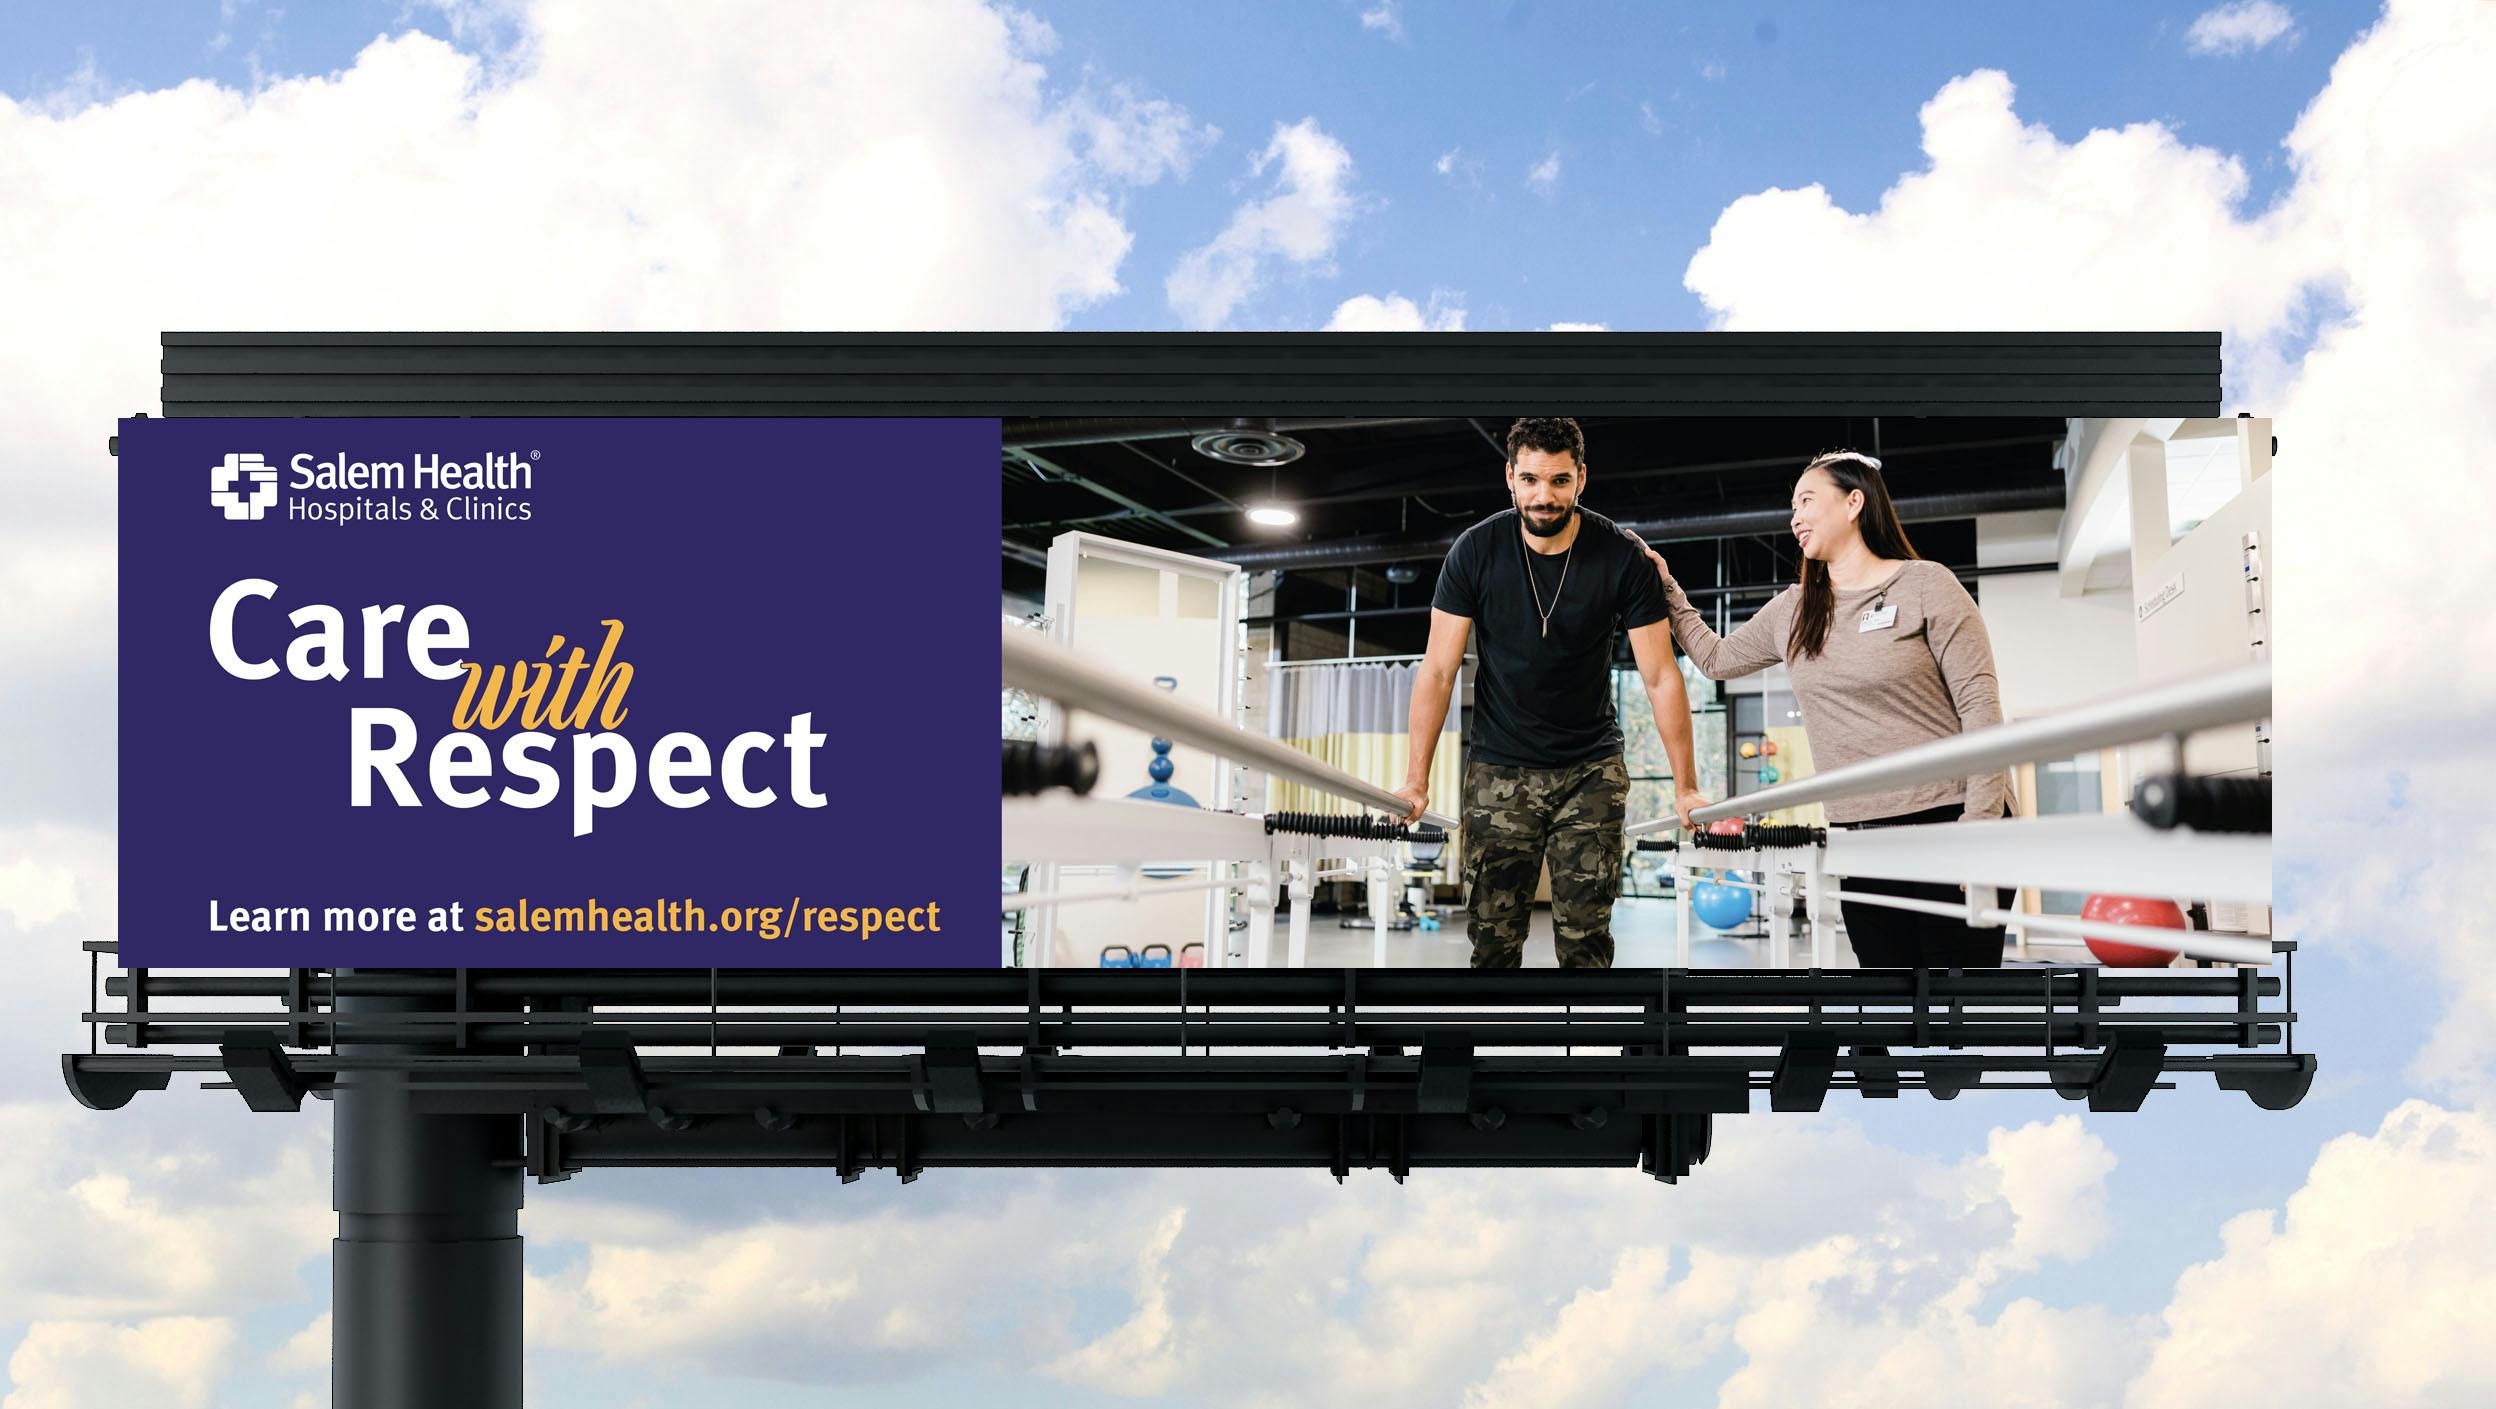 Image from Salem Health; billboard "Care with Respect"